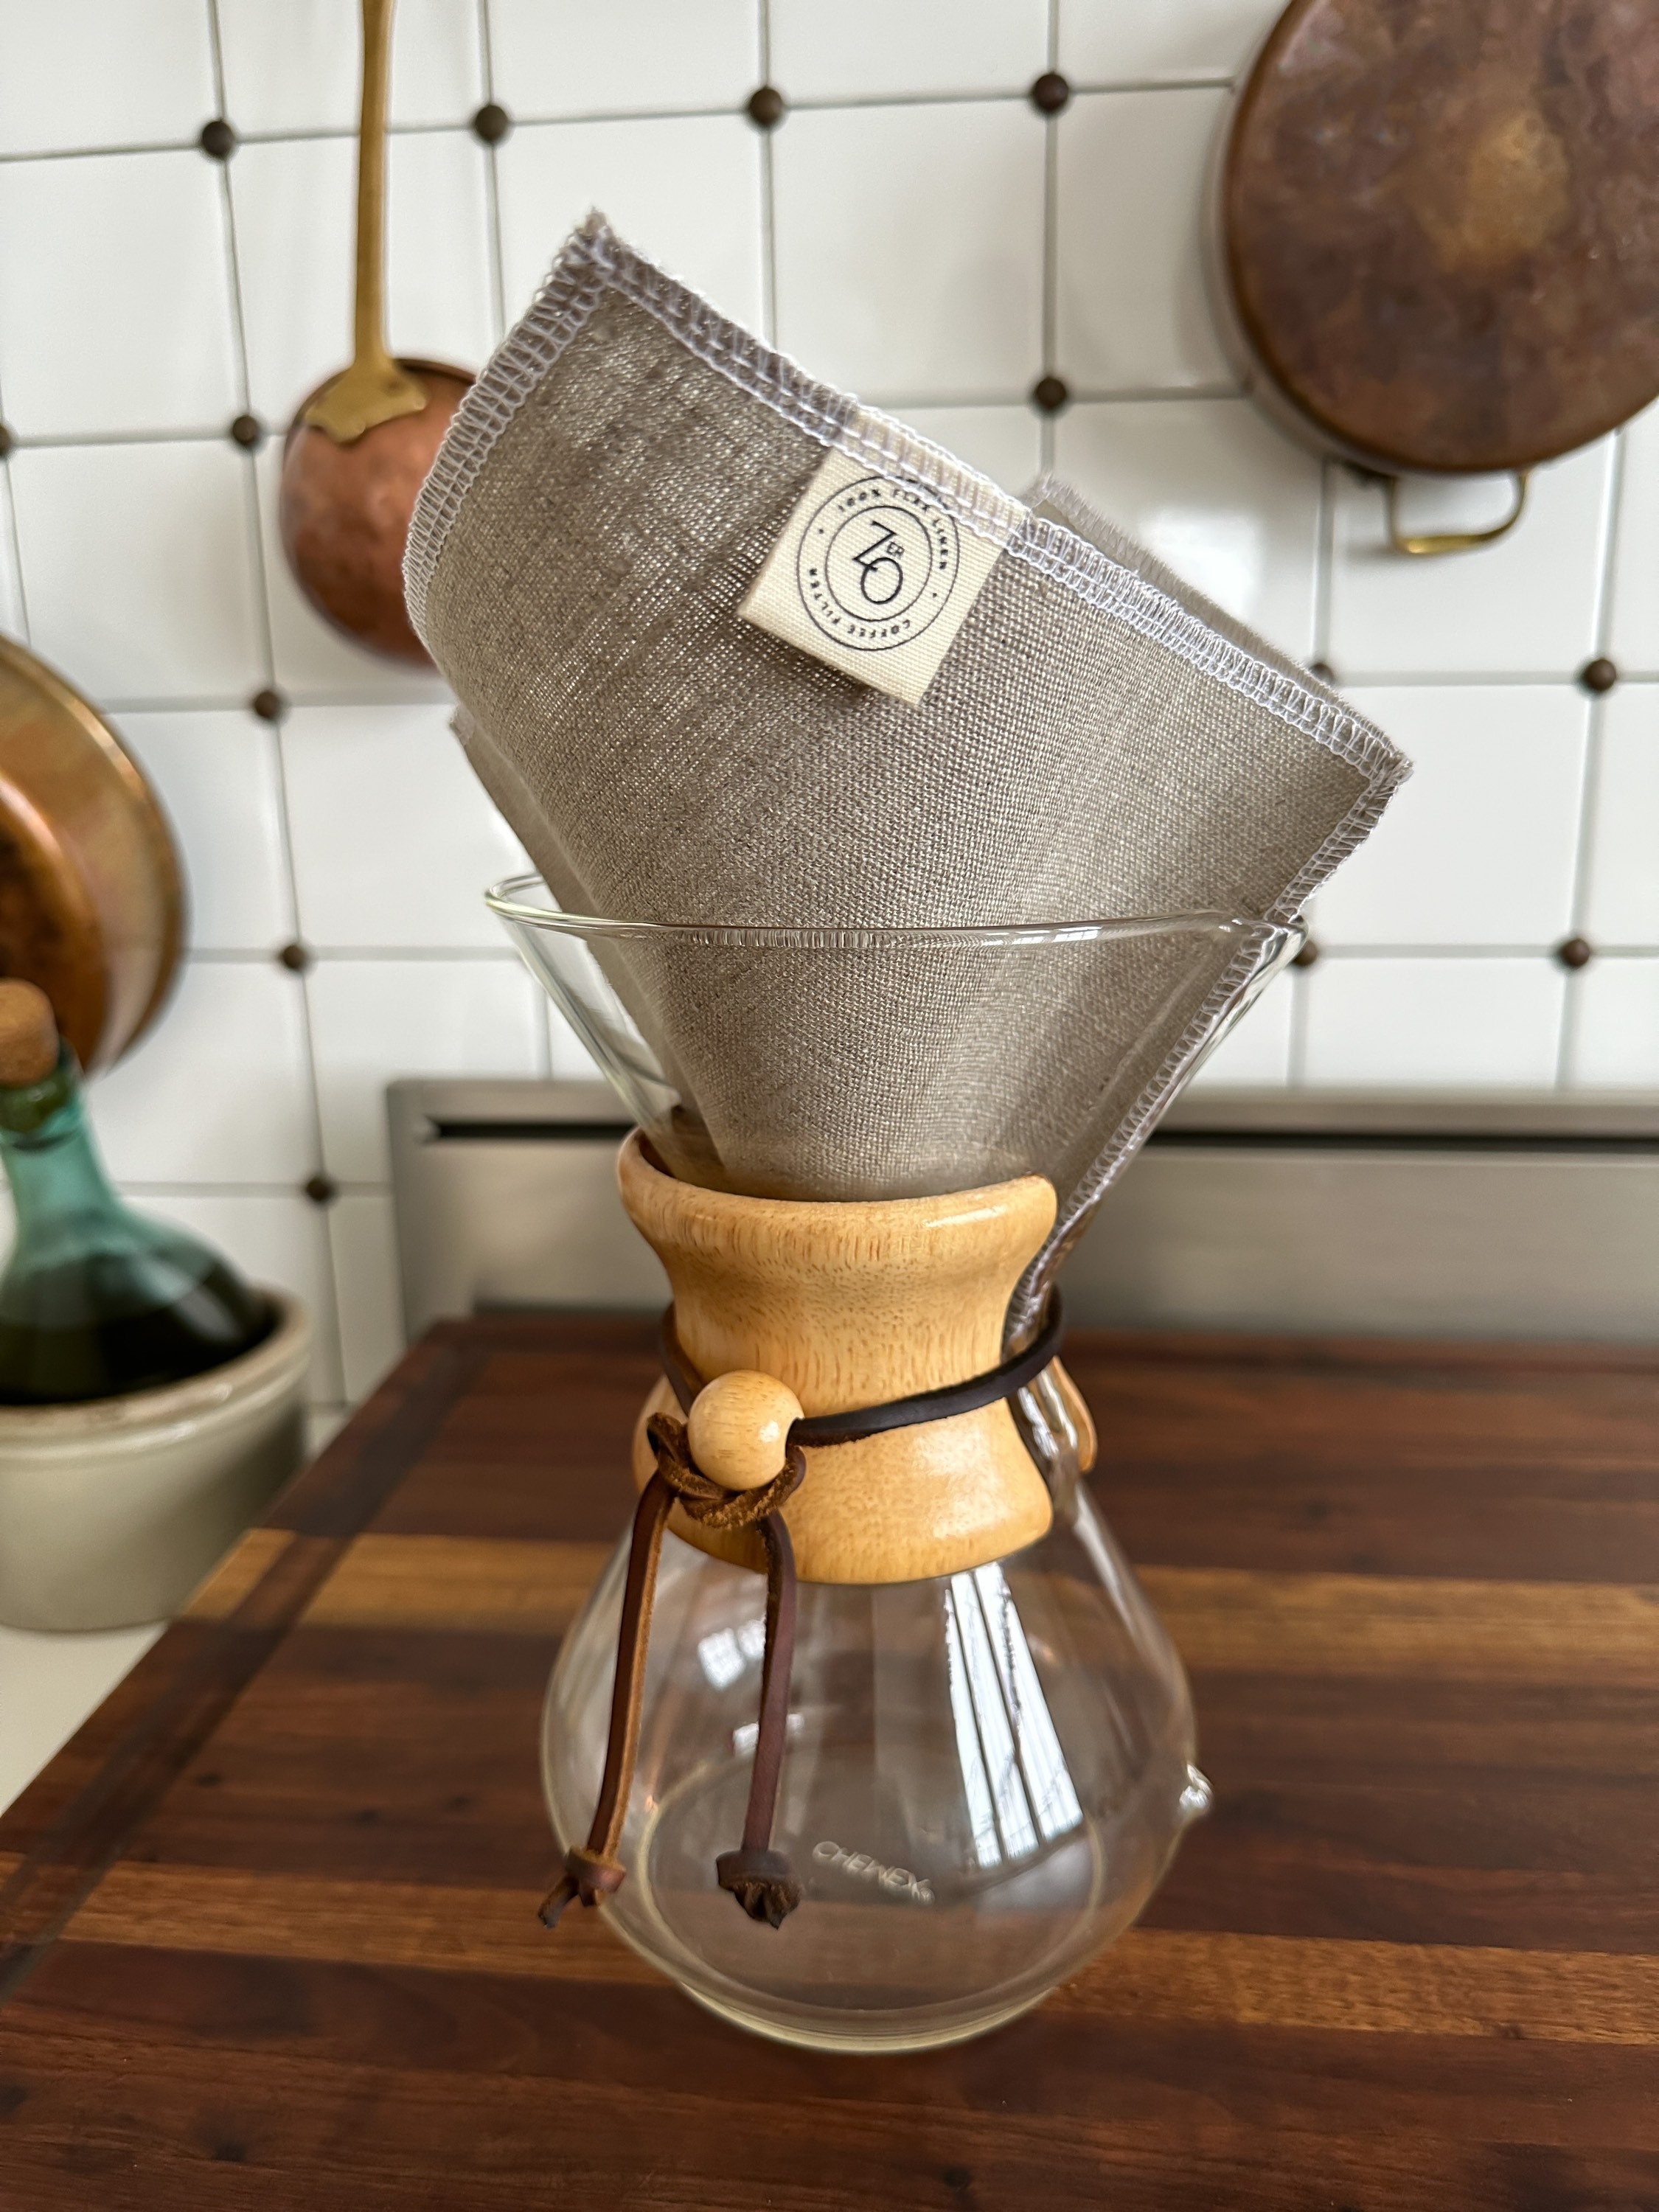 L'ÉPICÉA Pour Over Coffee Maker Set, Pour Over Coffee Maker with Stand, Adjustable Stainless Steel Stand, Wooden Base, Paper Filters, Cone Glass